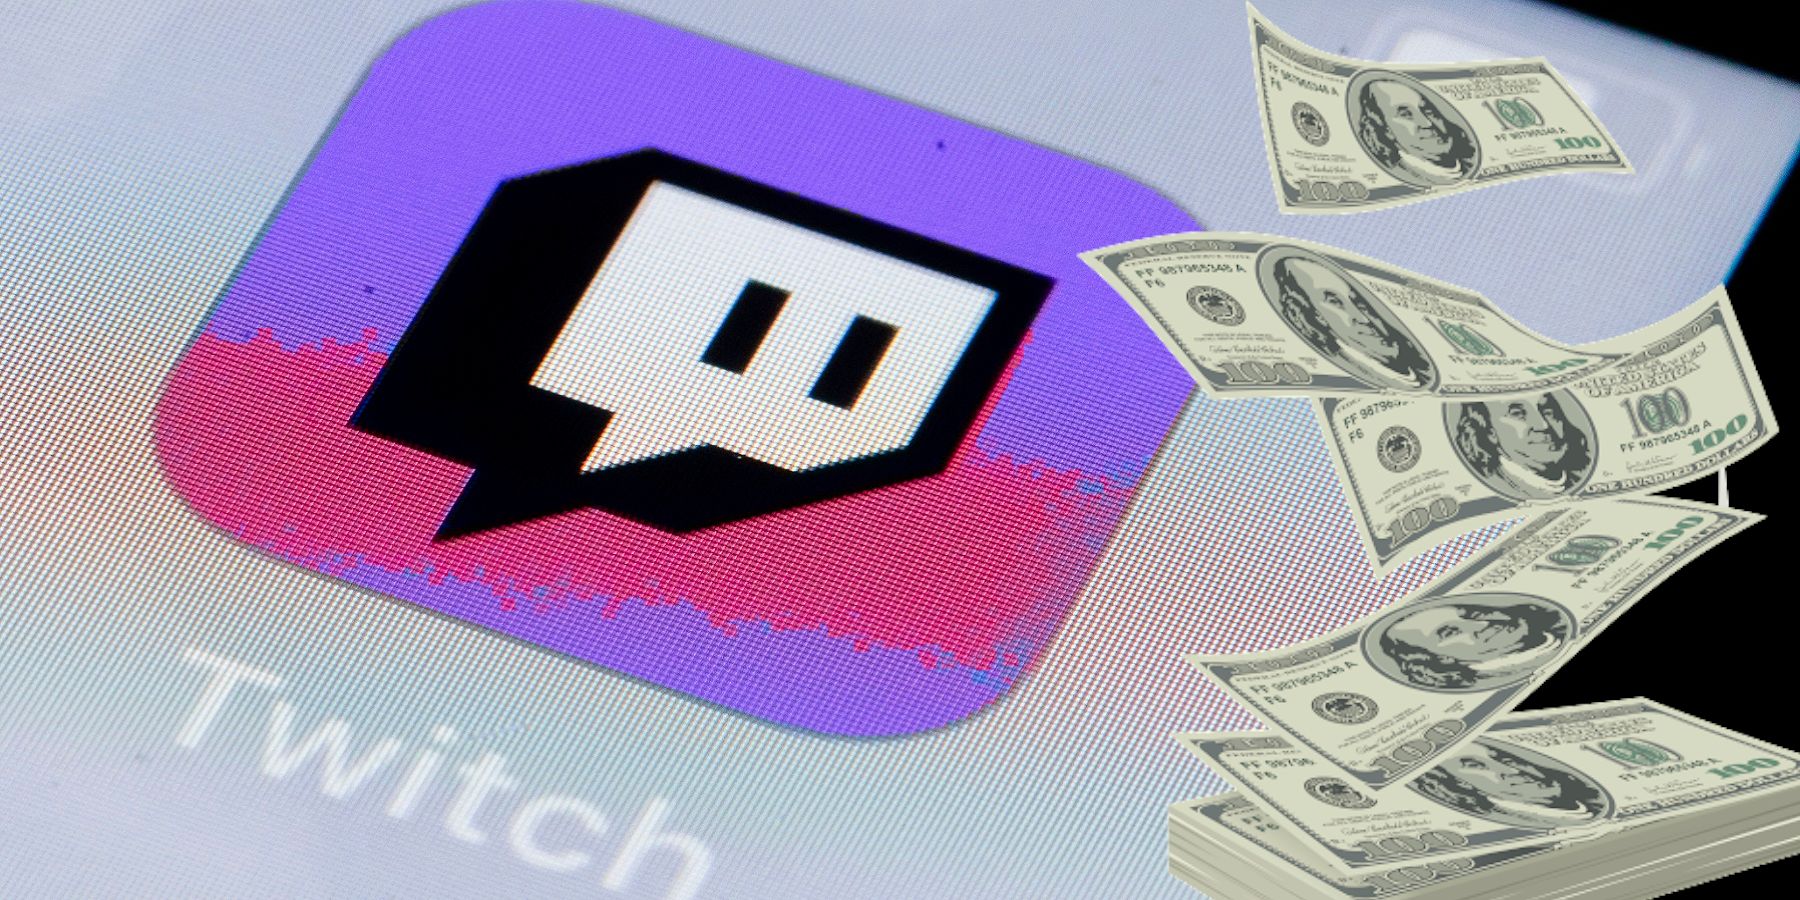 Twitch is Reportedly Paying Less Money to Streamers, According to Ex